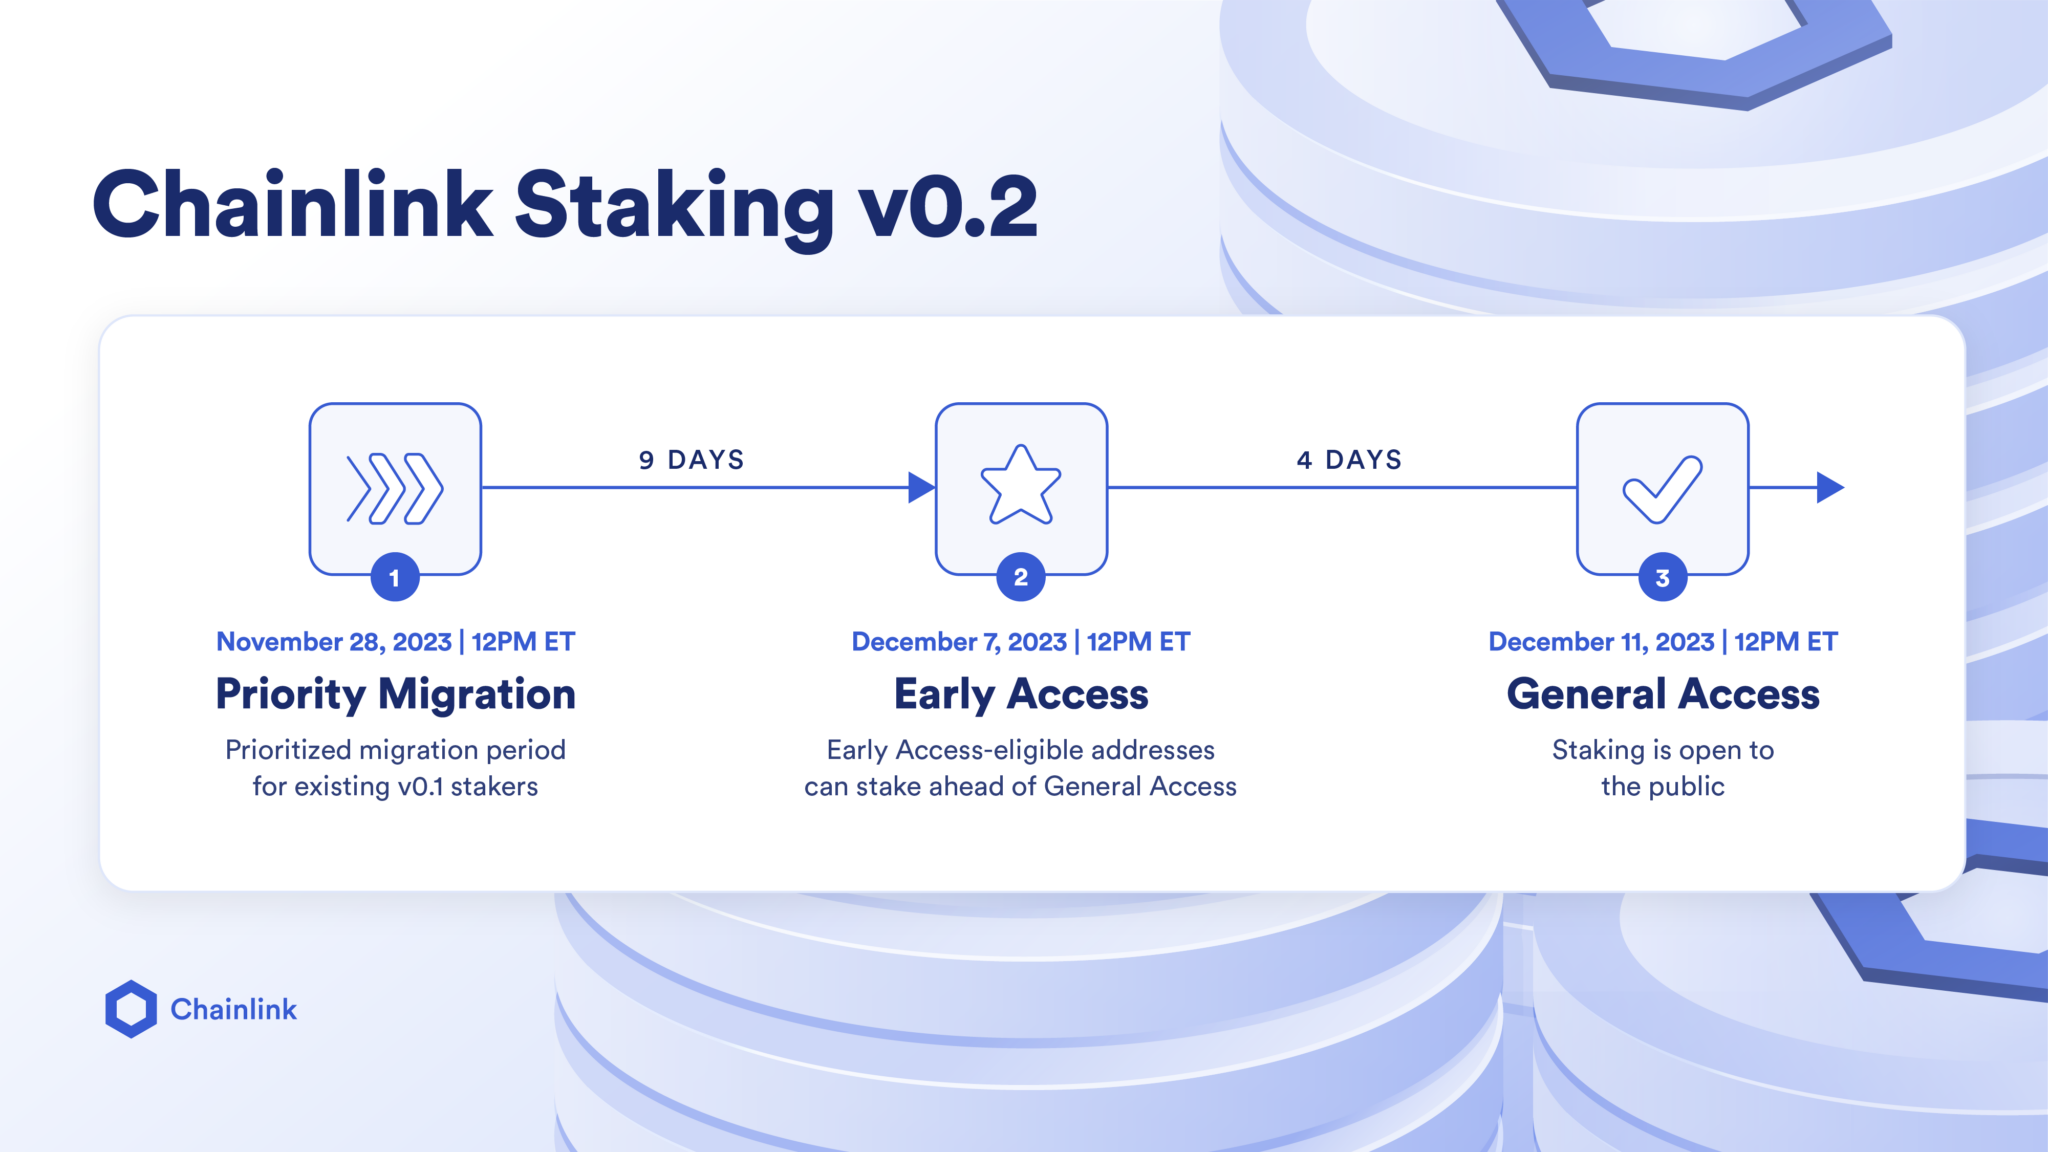 Chainlink Staking: 5 Minute Beginners Guide For Sucess